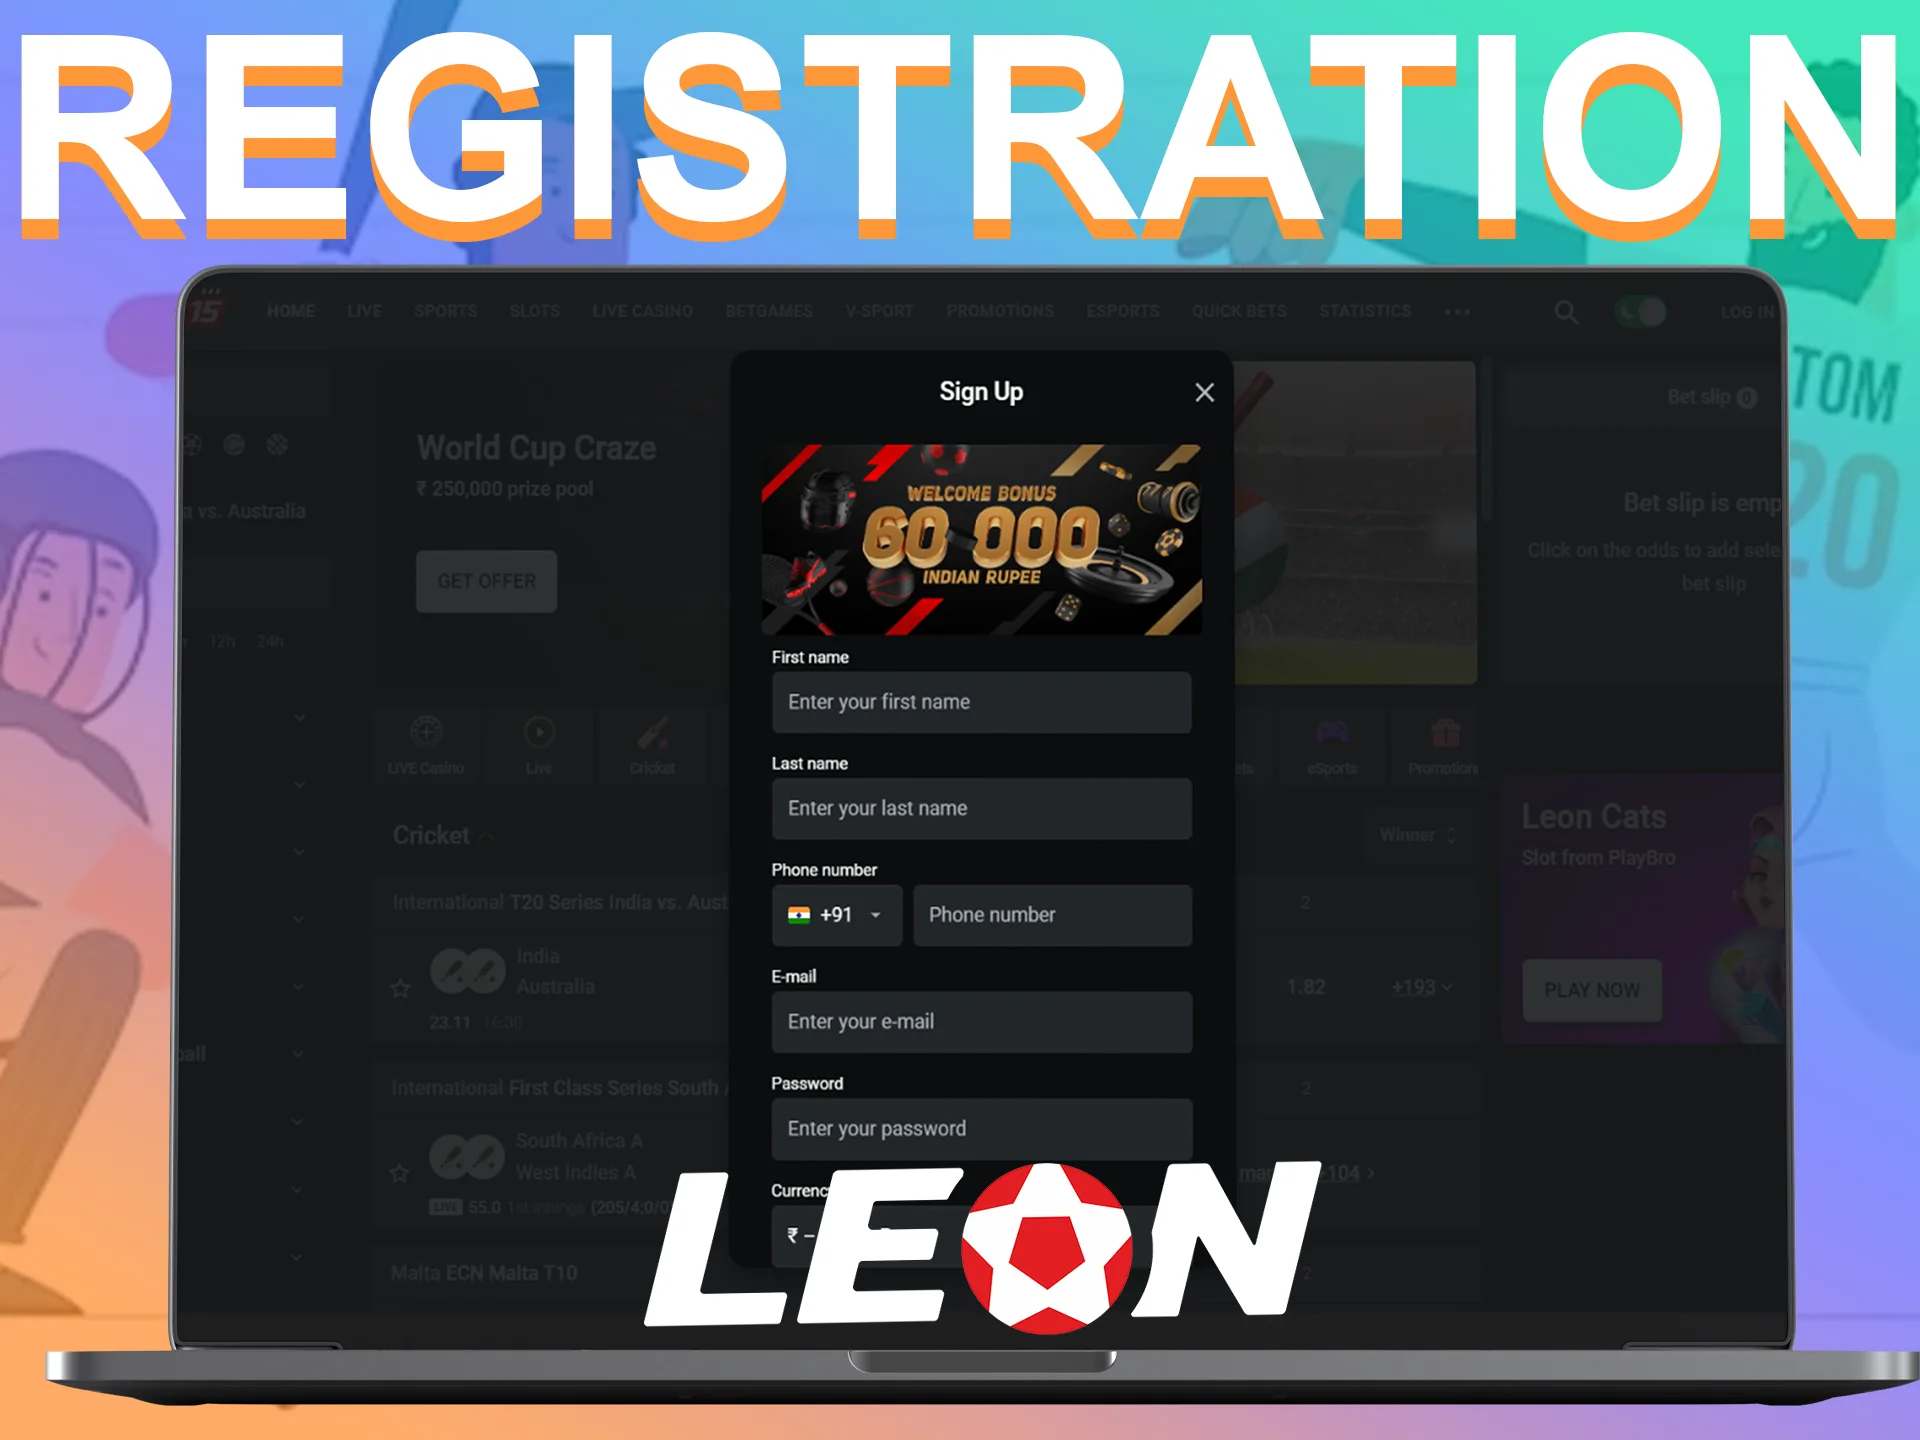 To start playing, register on the official LeonBet website using the step-by-step instructions.